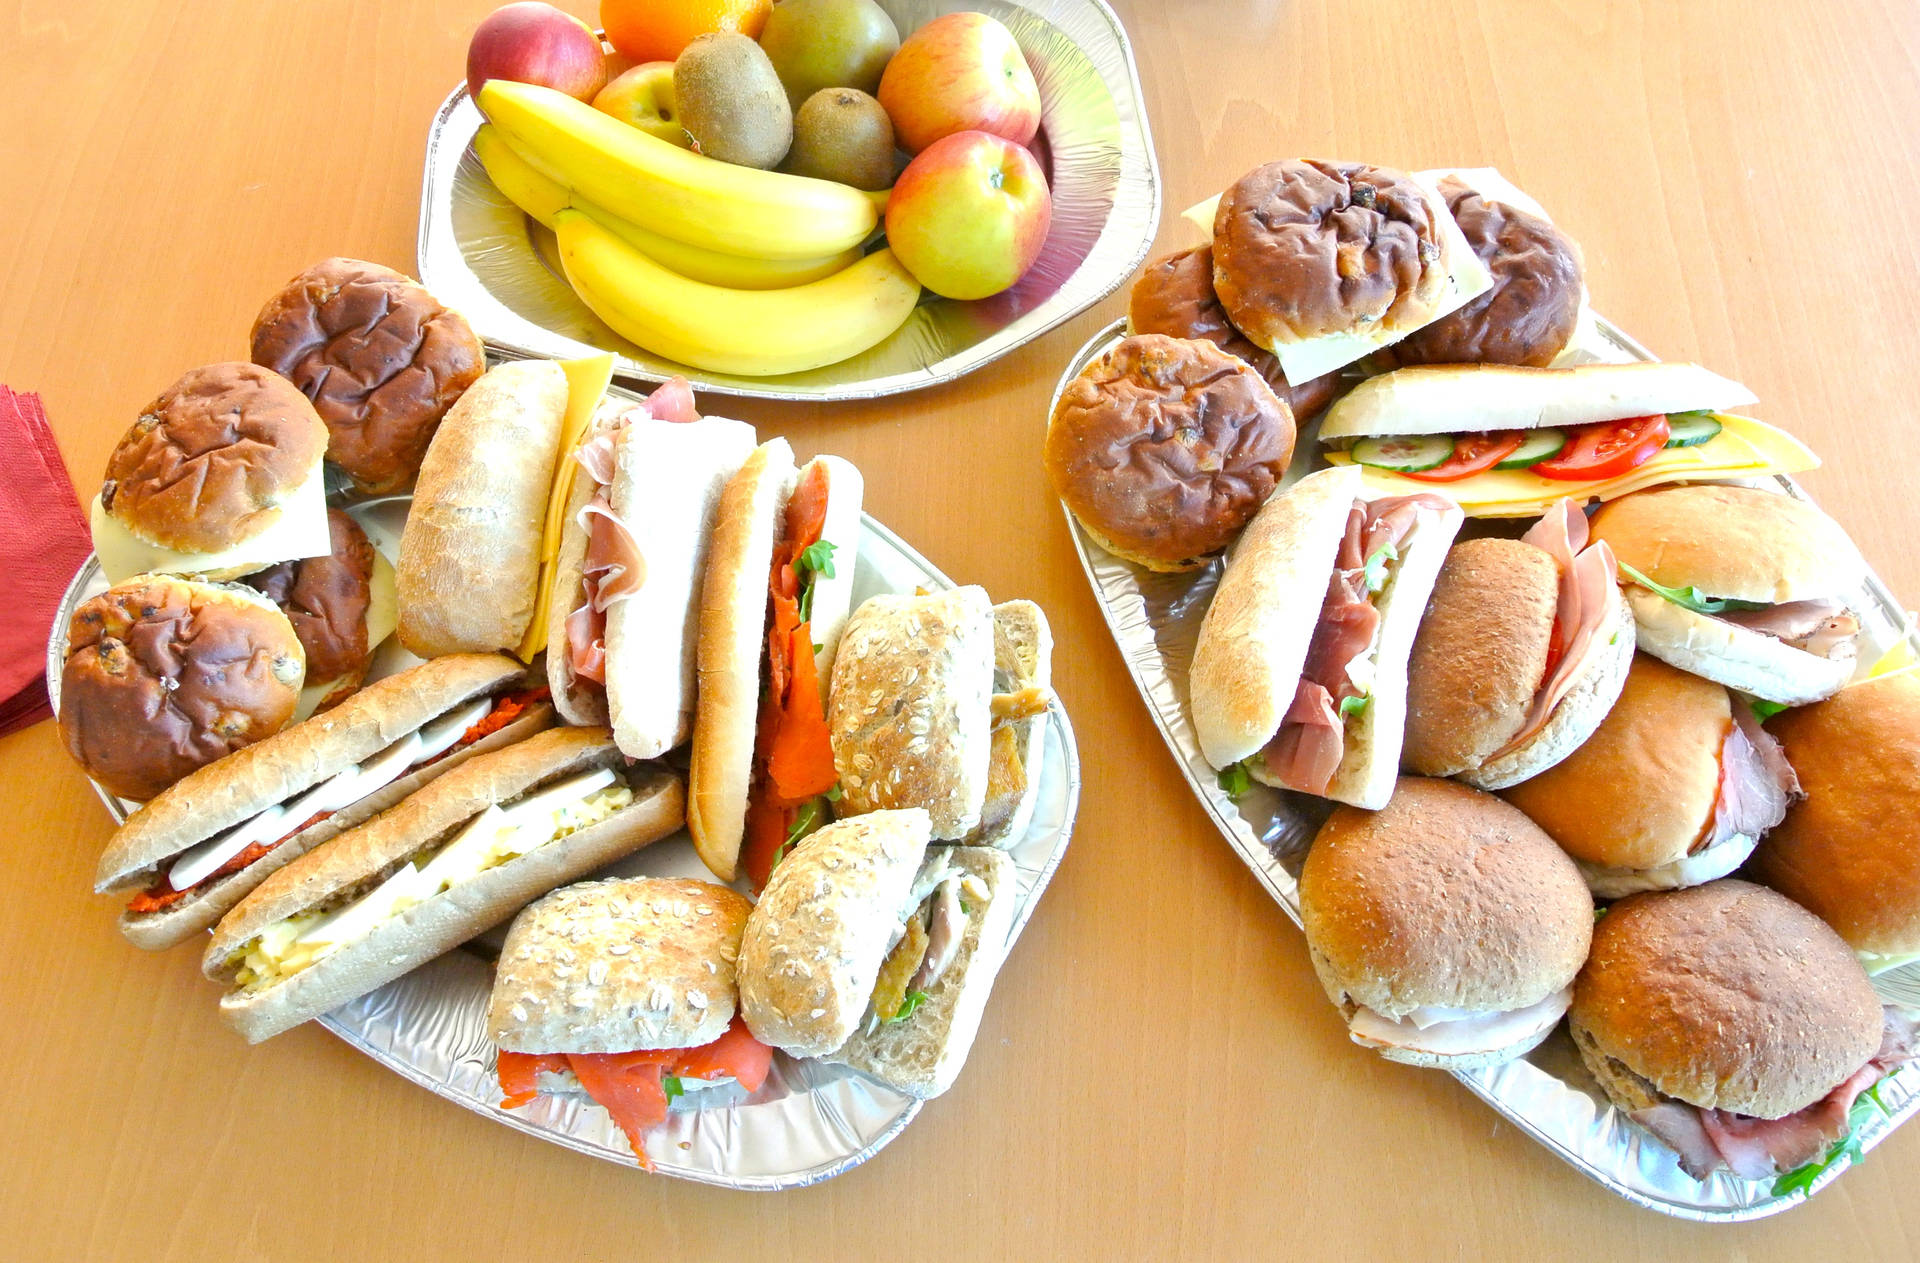 Caption: Savoring A Healthy Lunch: Sandwich Platter And Fruits